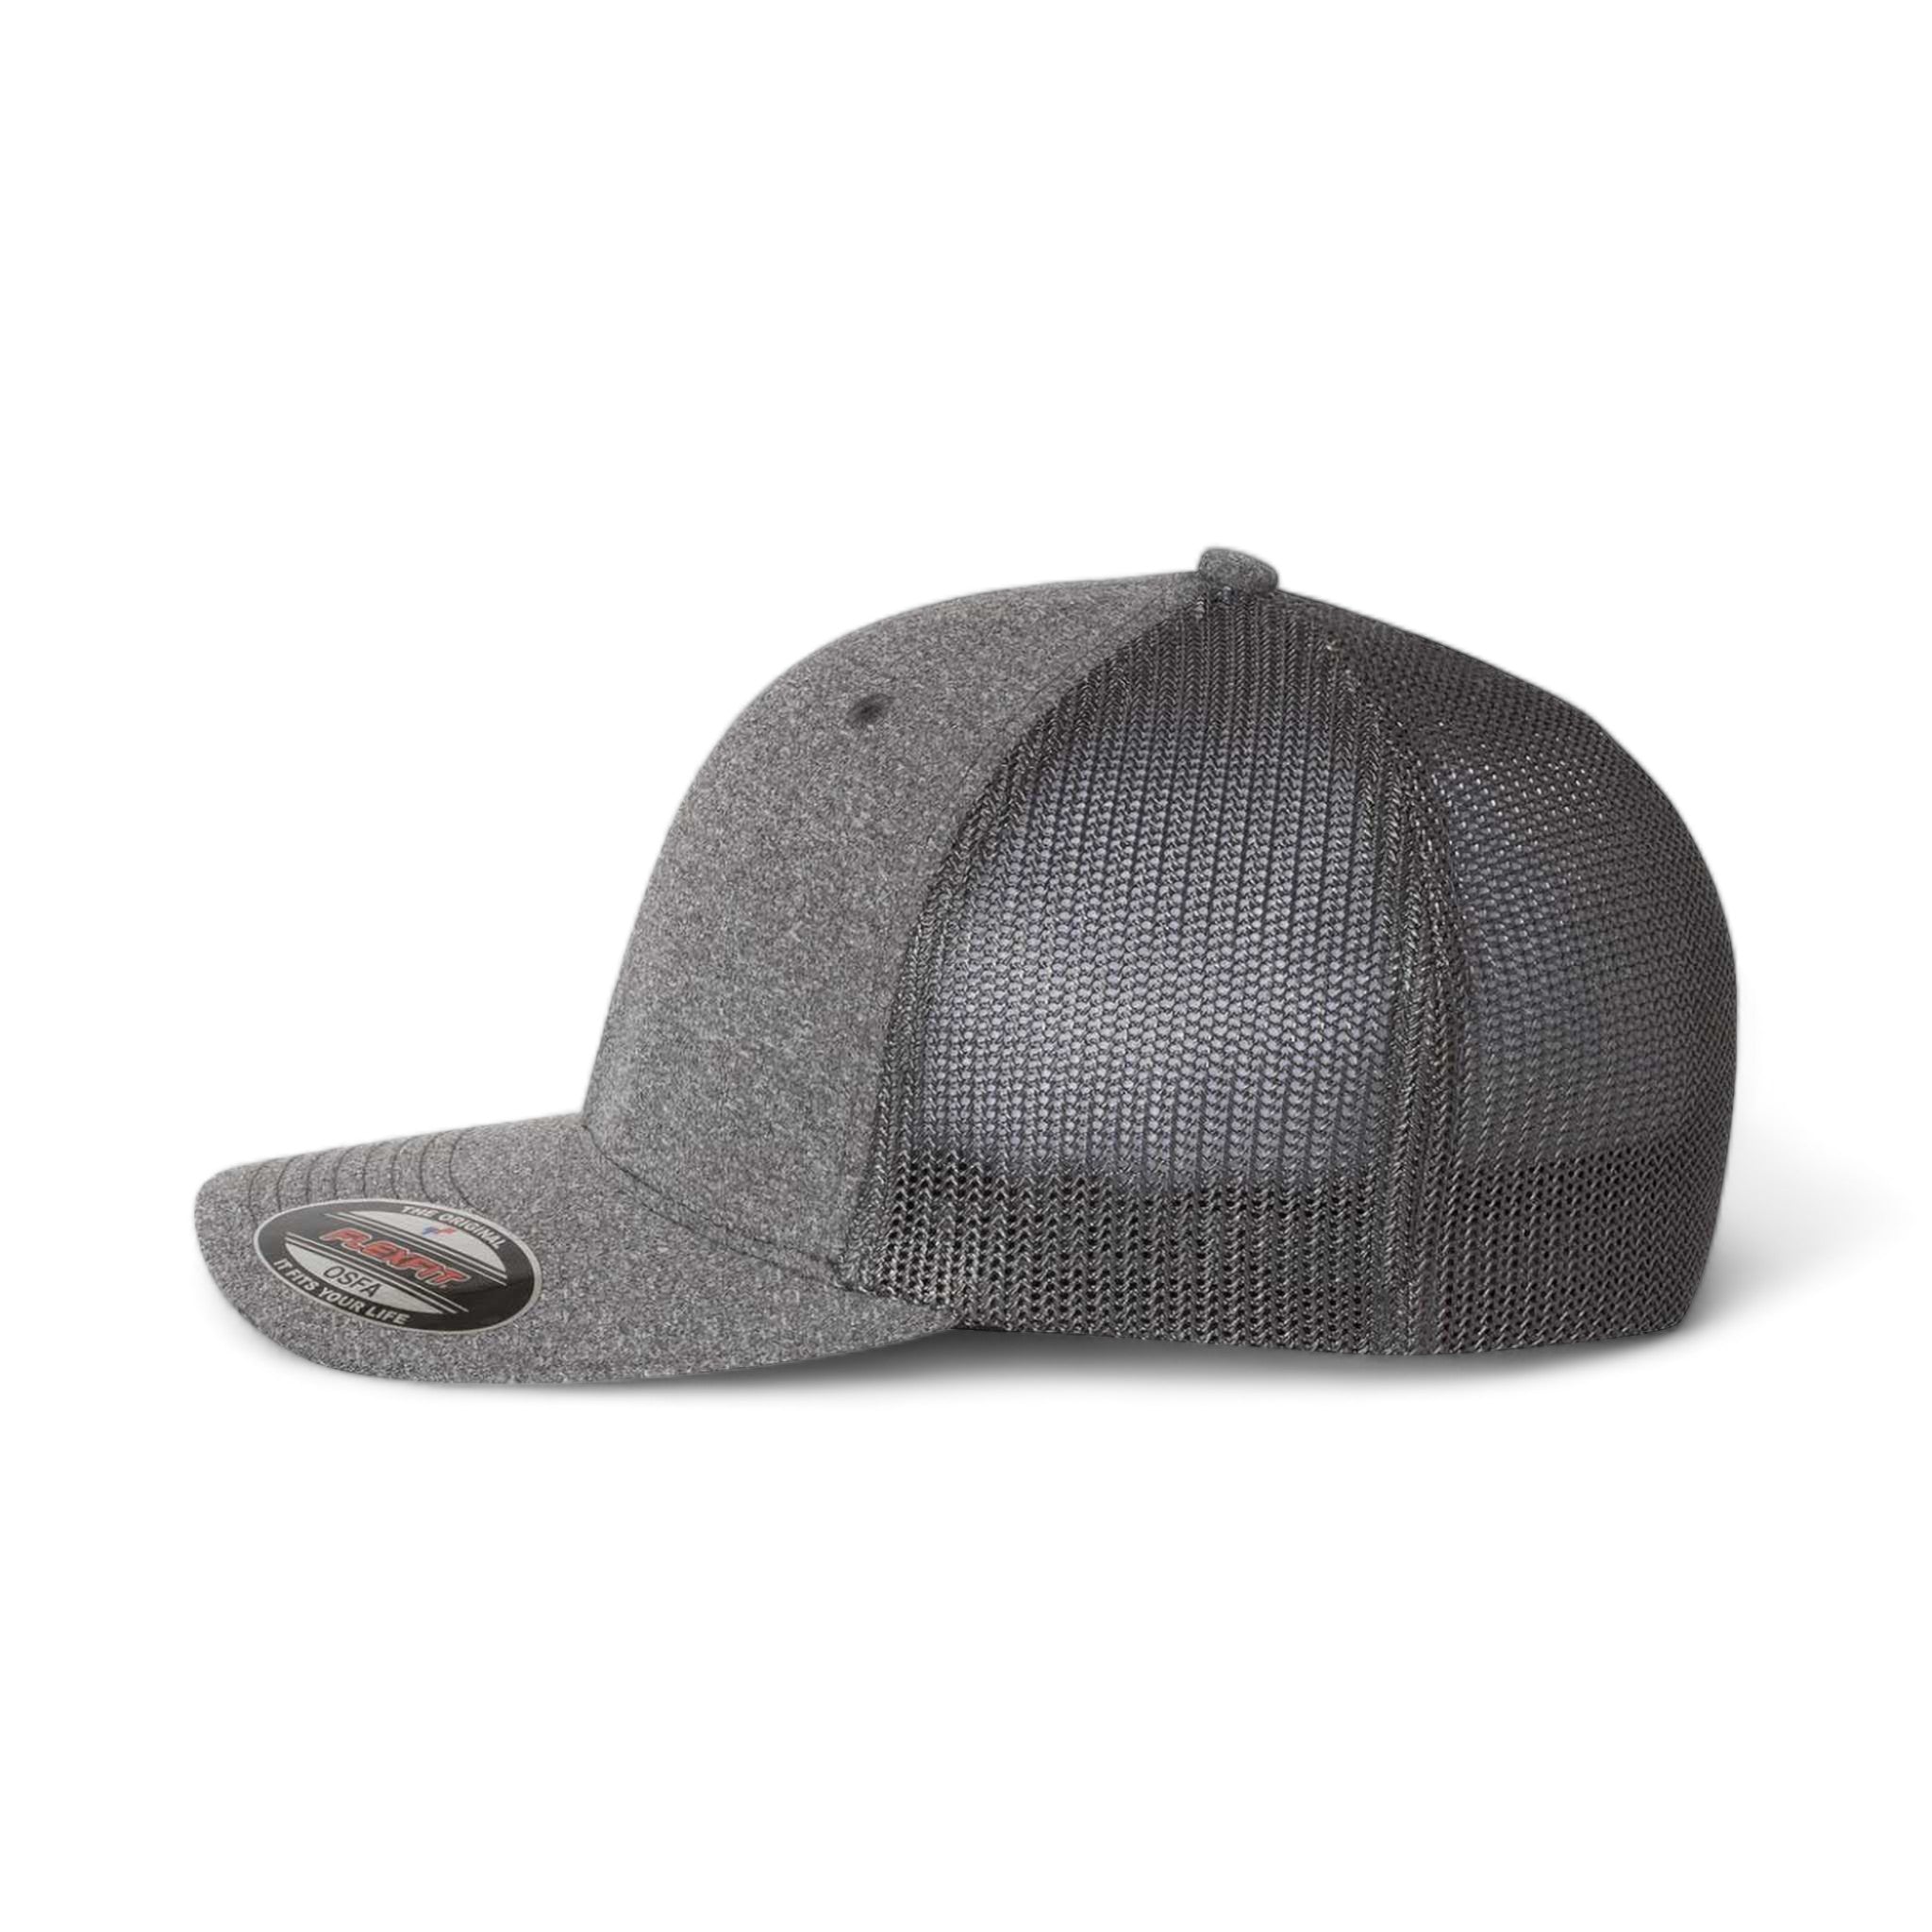 Side view of Flexfit 6311 custom hat in dark heather grey and charcoal